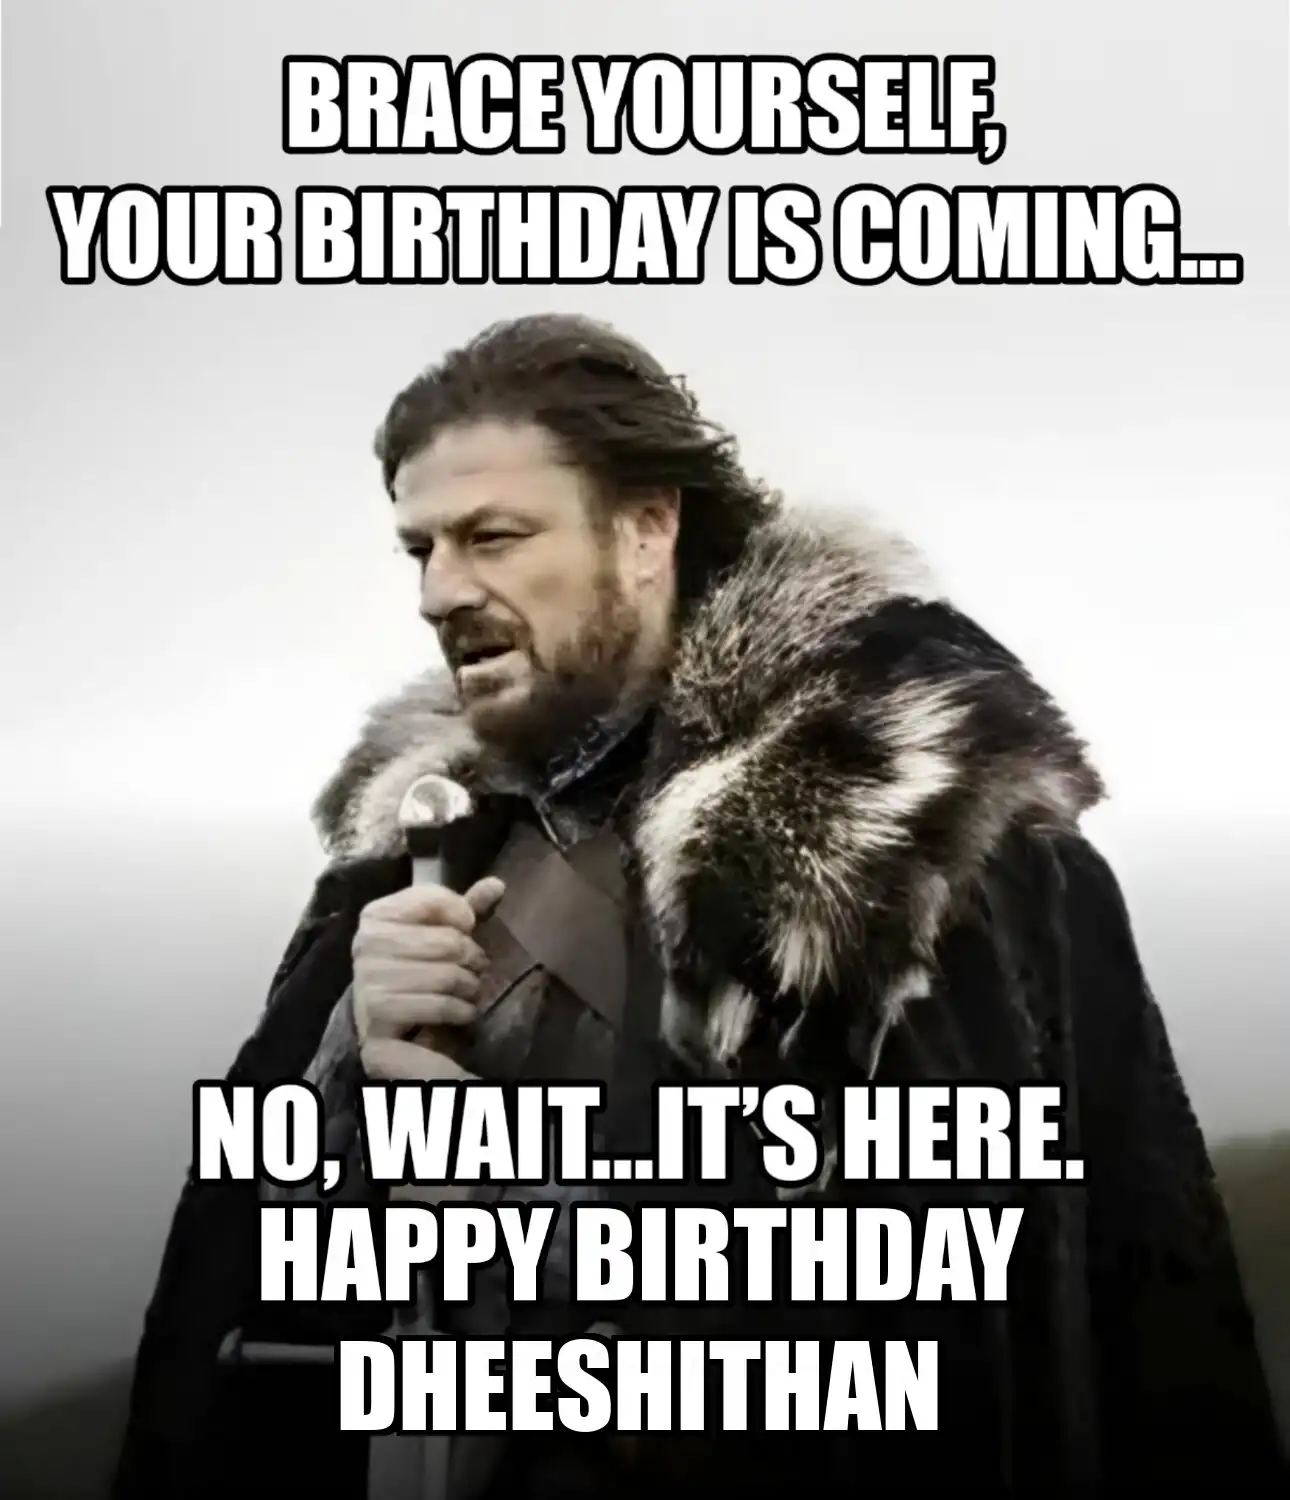 Happy Birthday Dheeshithan Brace Yourself Your Birthday Is Coming Meme